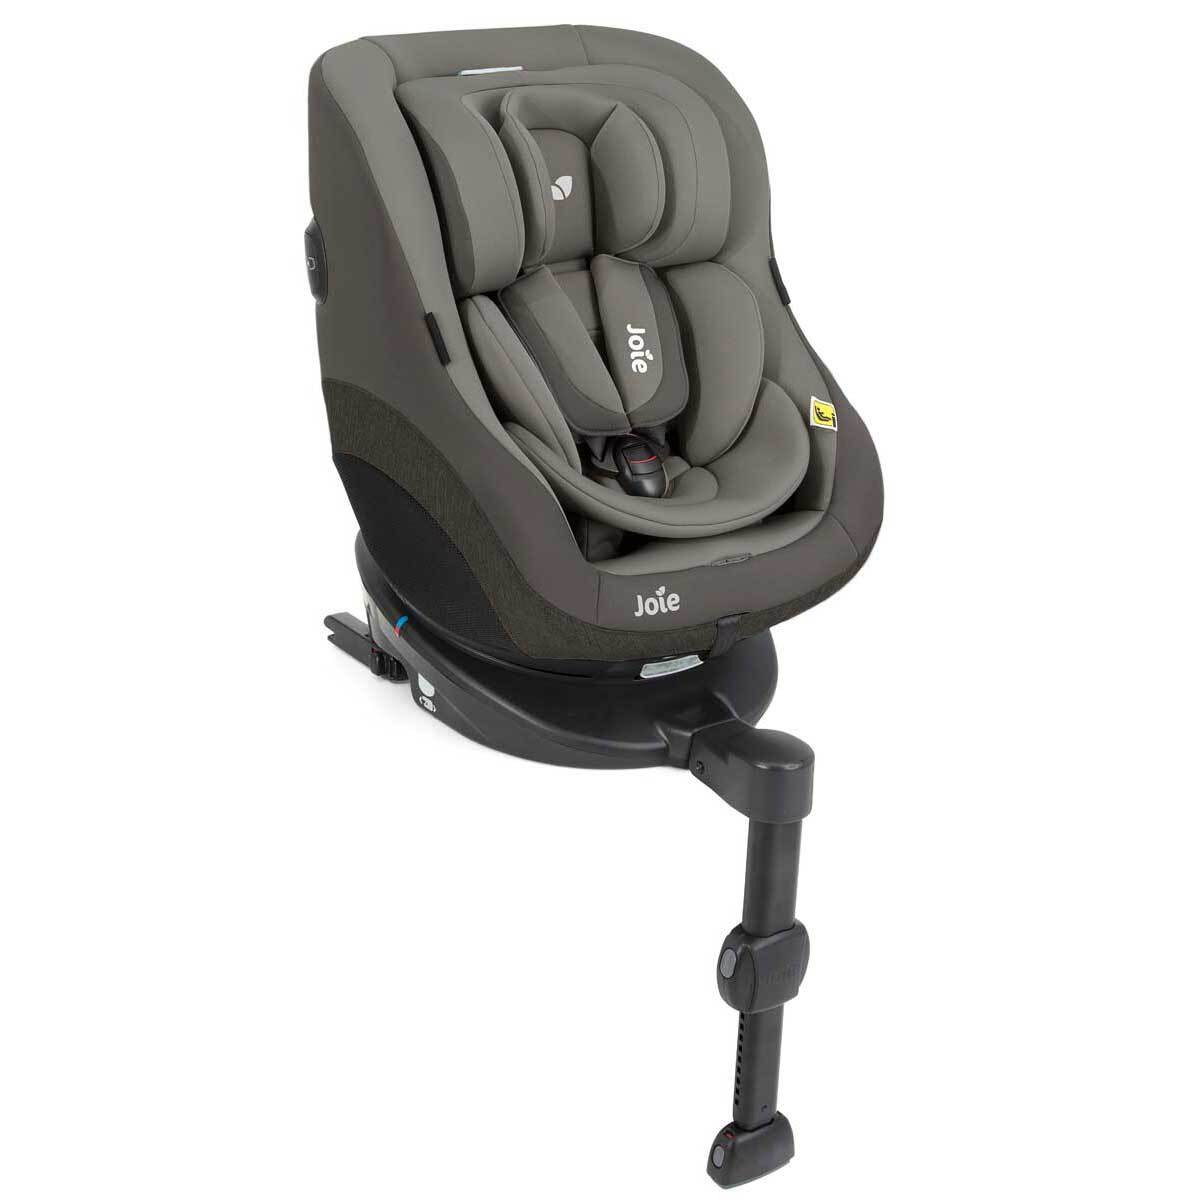 Joie Spin 360 in Cobblestone Group0+/1 Car Seat | Early Learning Centre